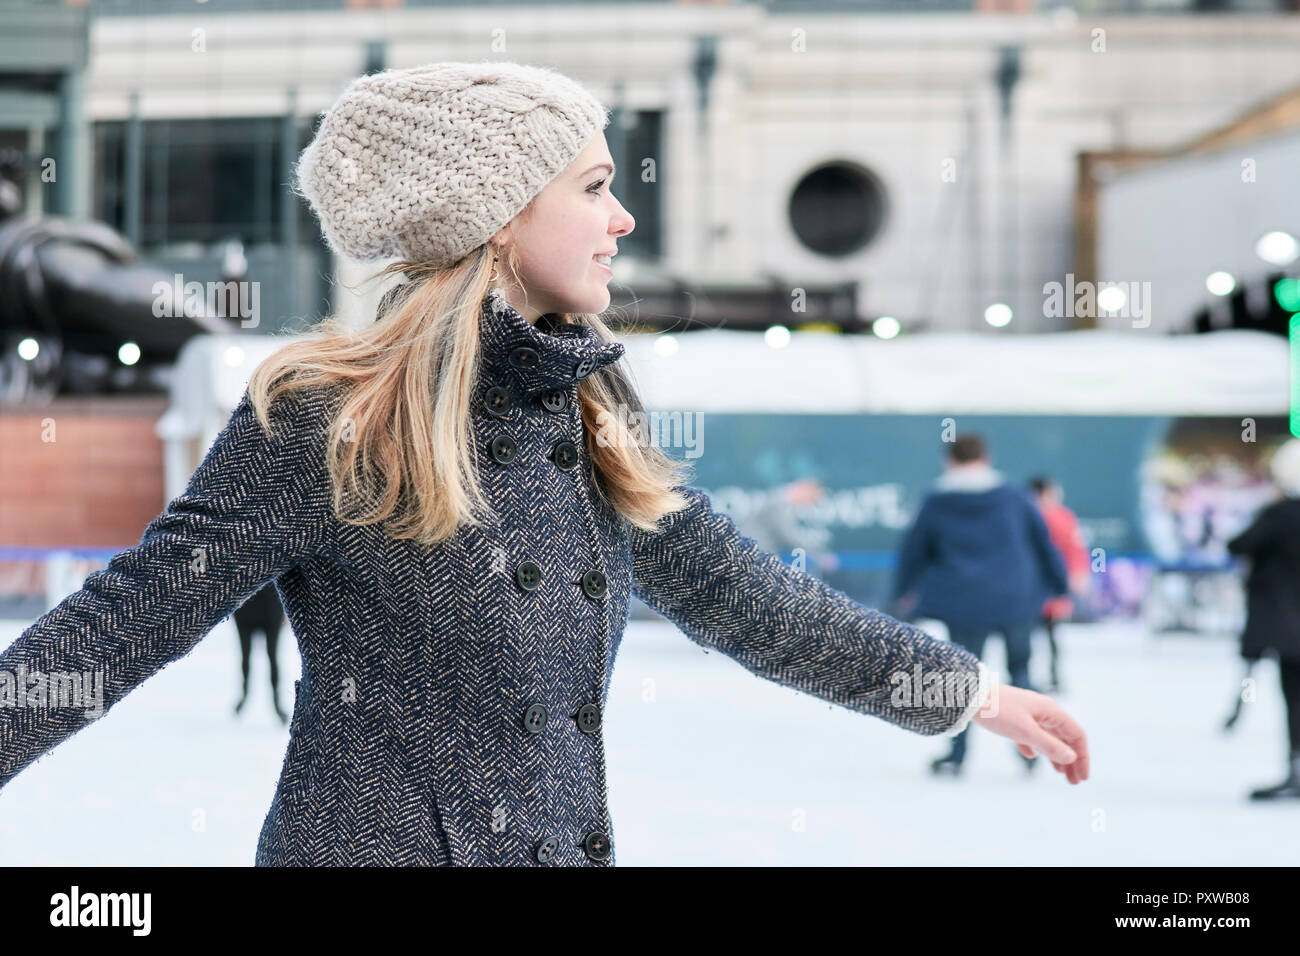 Young blonde woman ice skating Stock Photo